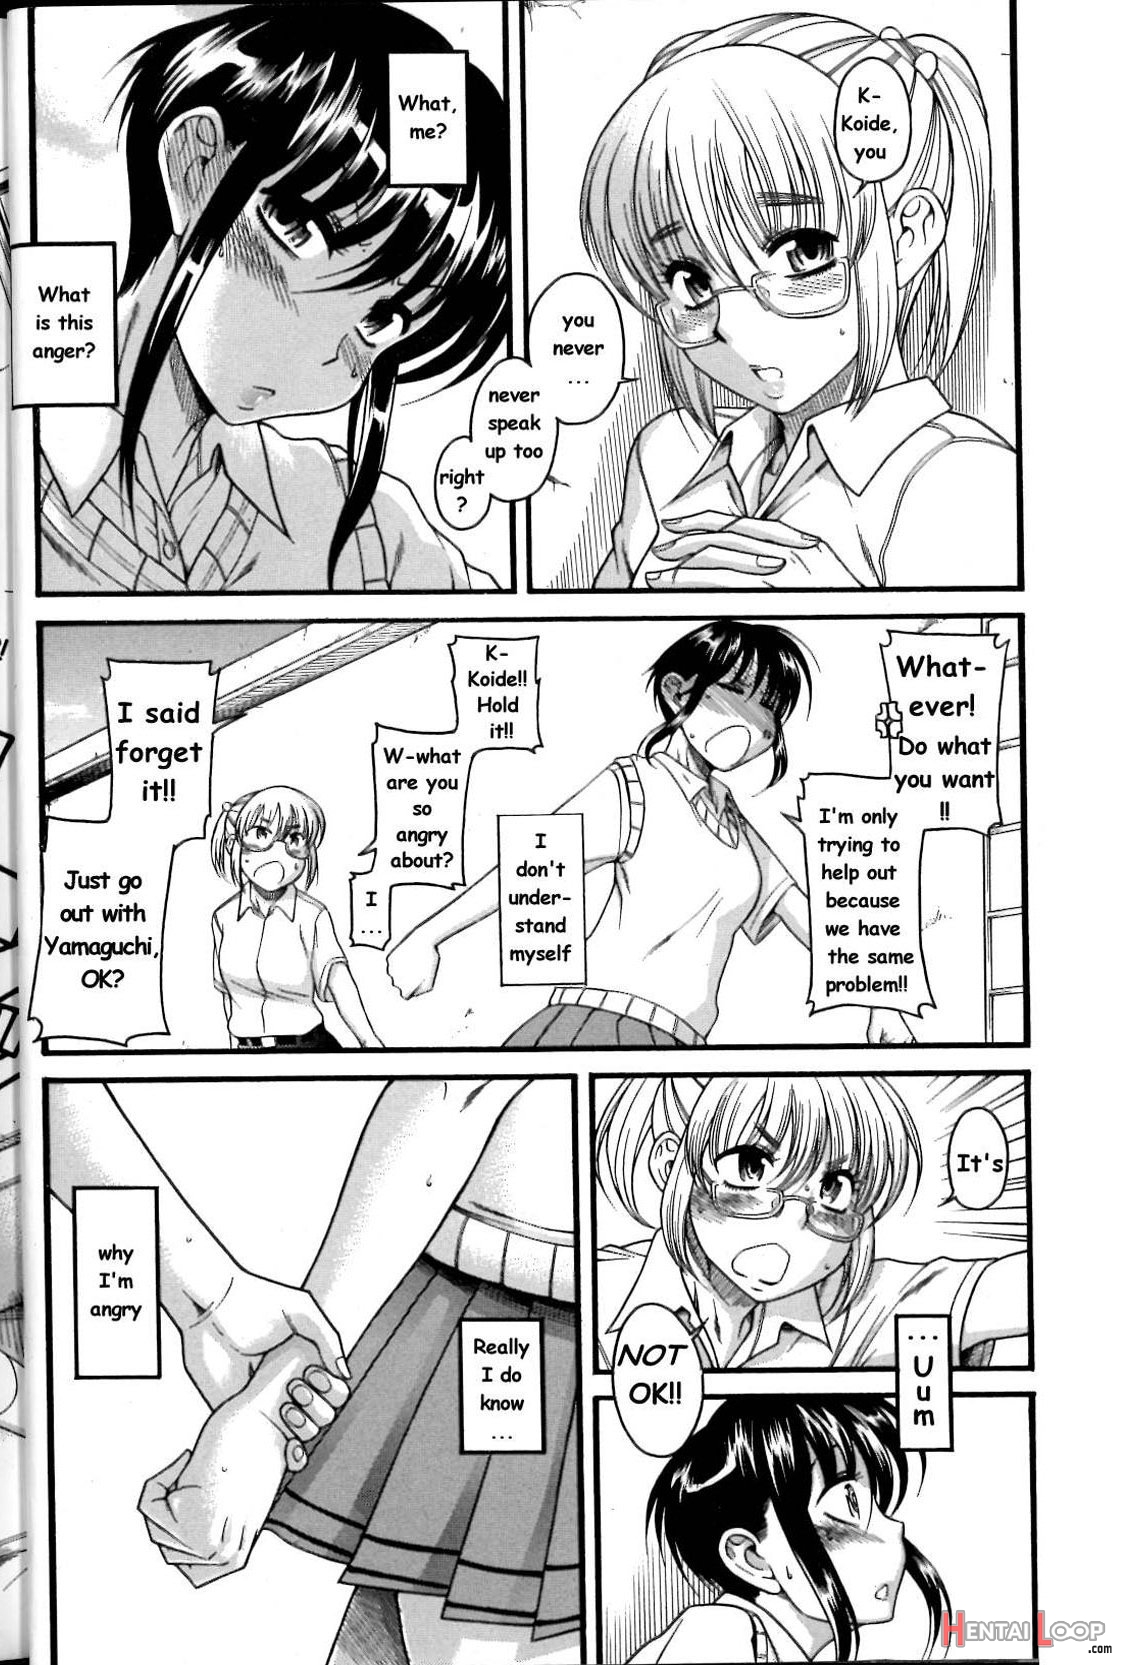 Boy Meets Girl, Girl Meets Boy 2- Single Page Version page 18